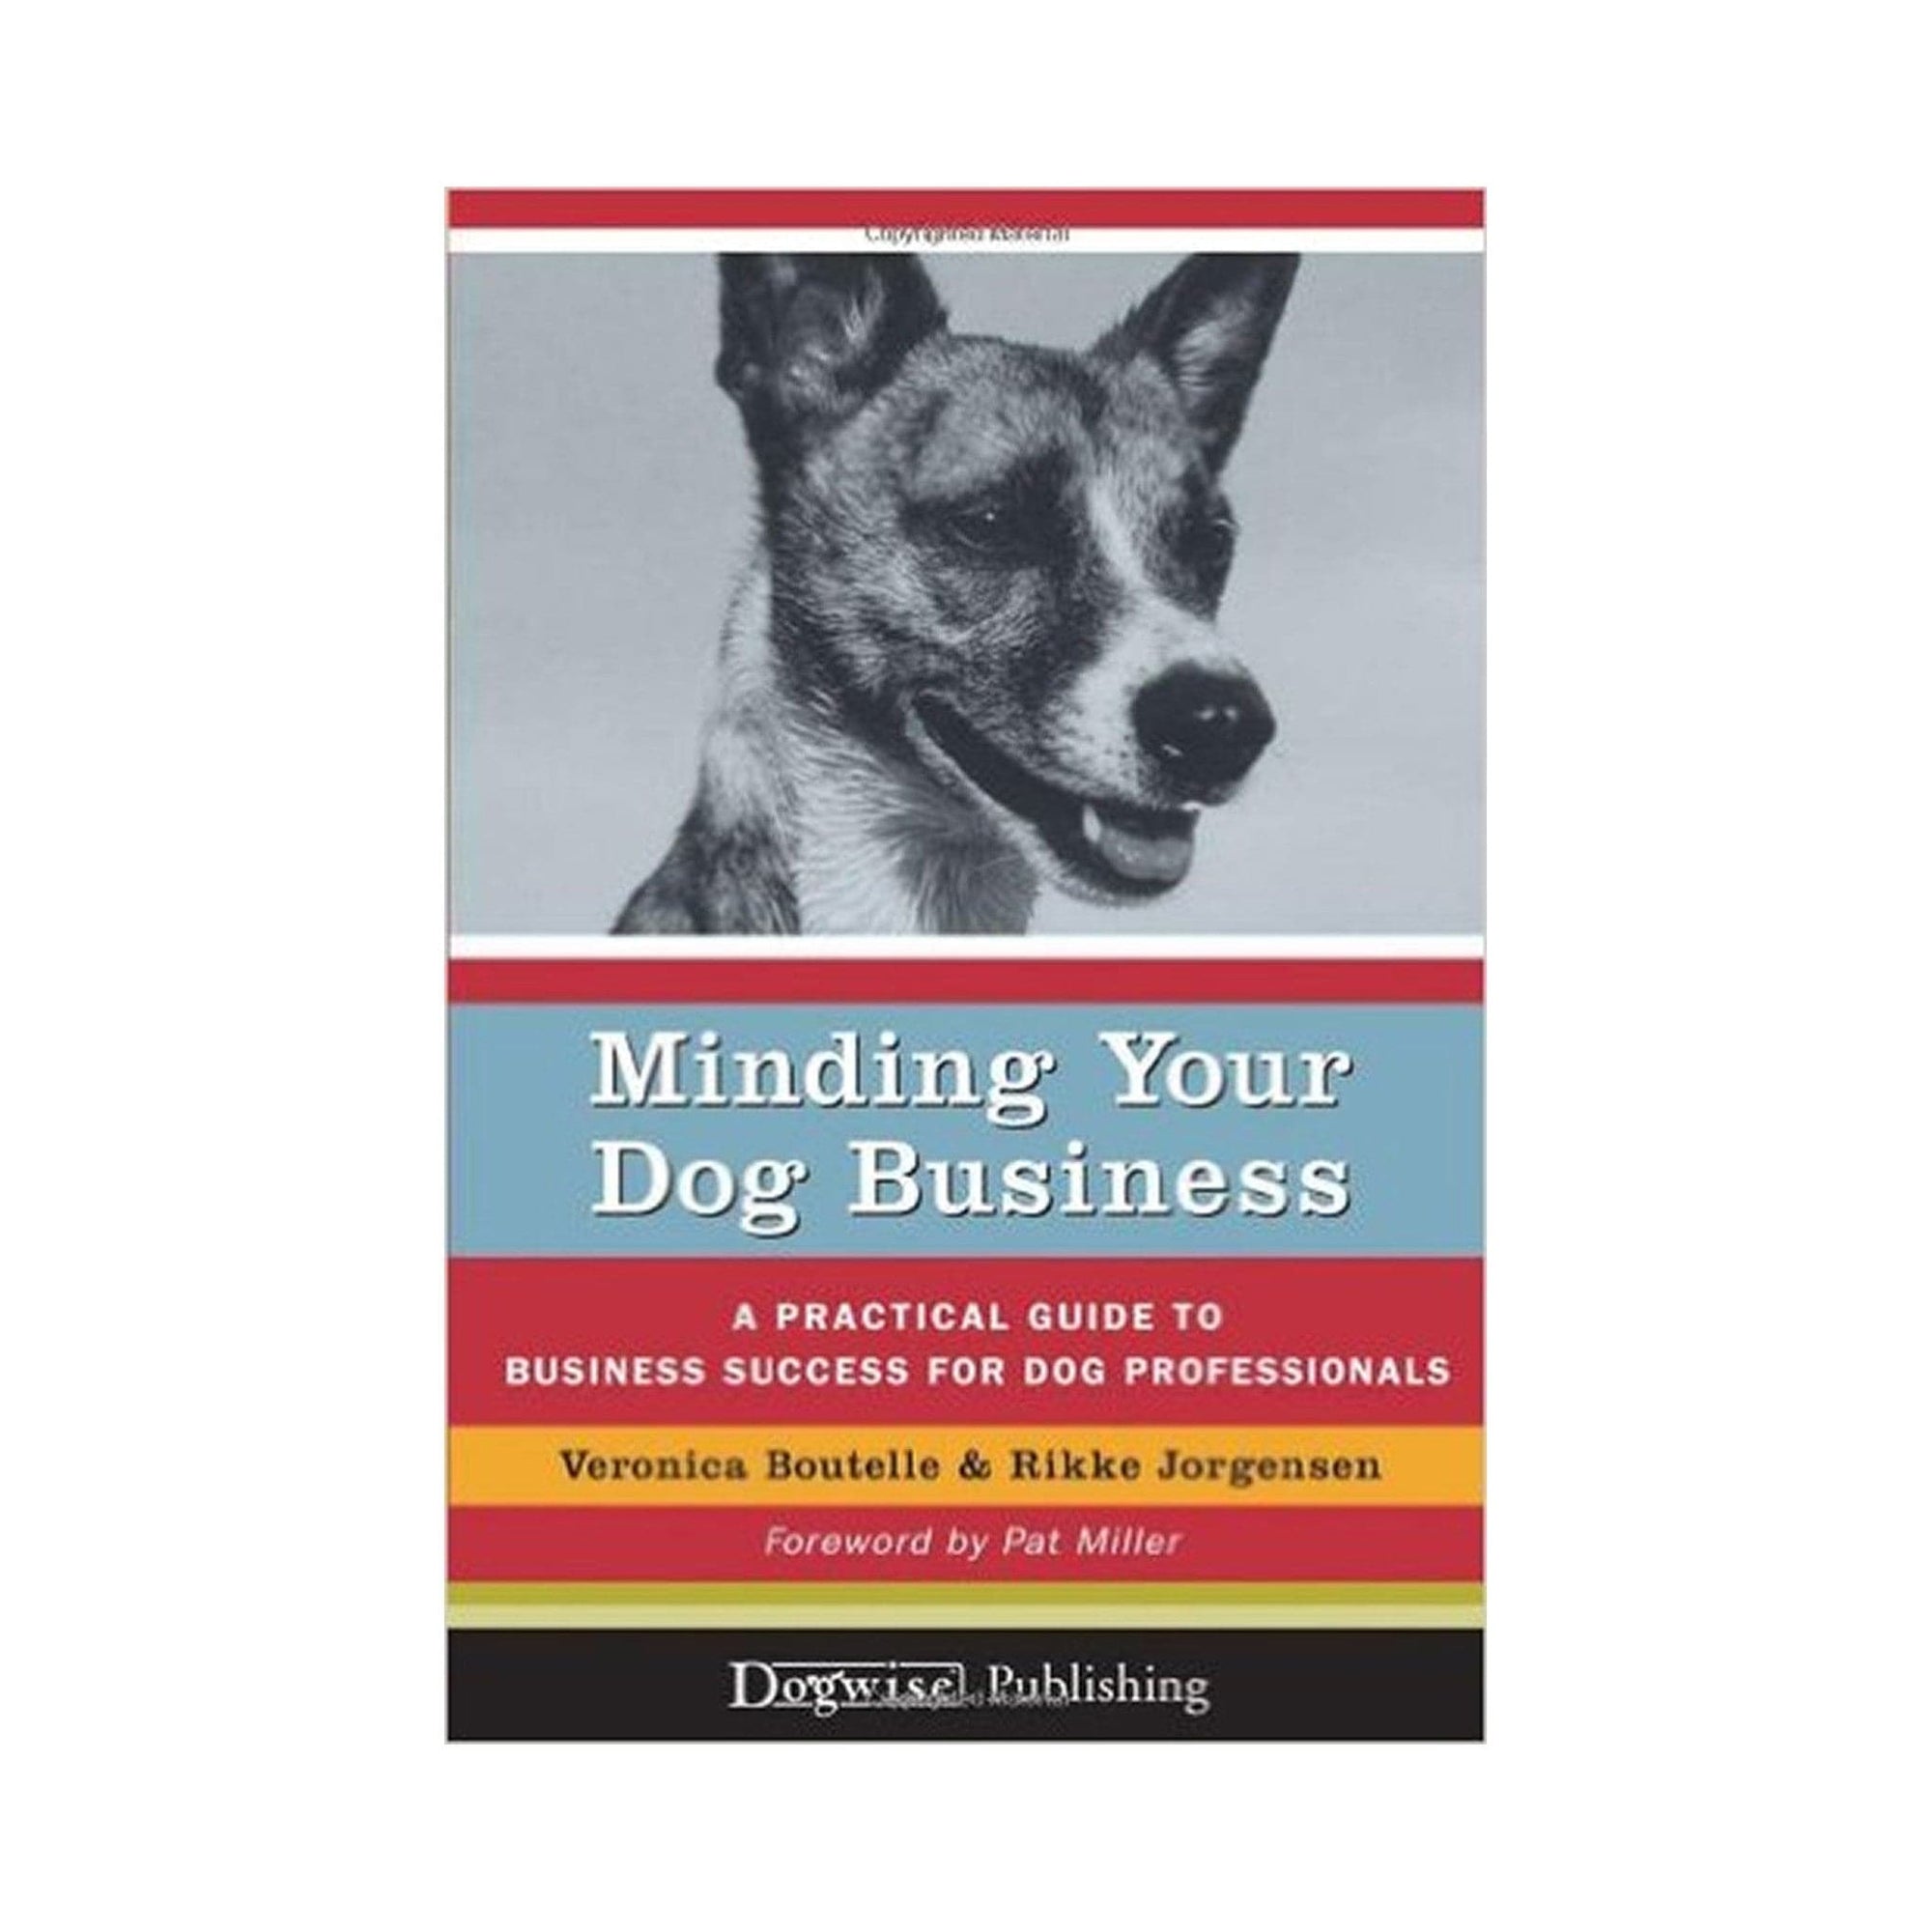 Minding Your Dog Business  e-book